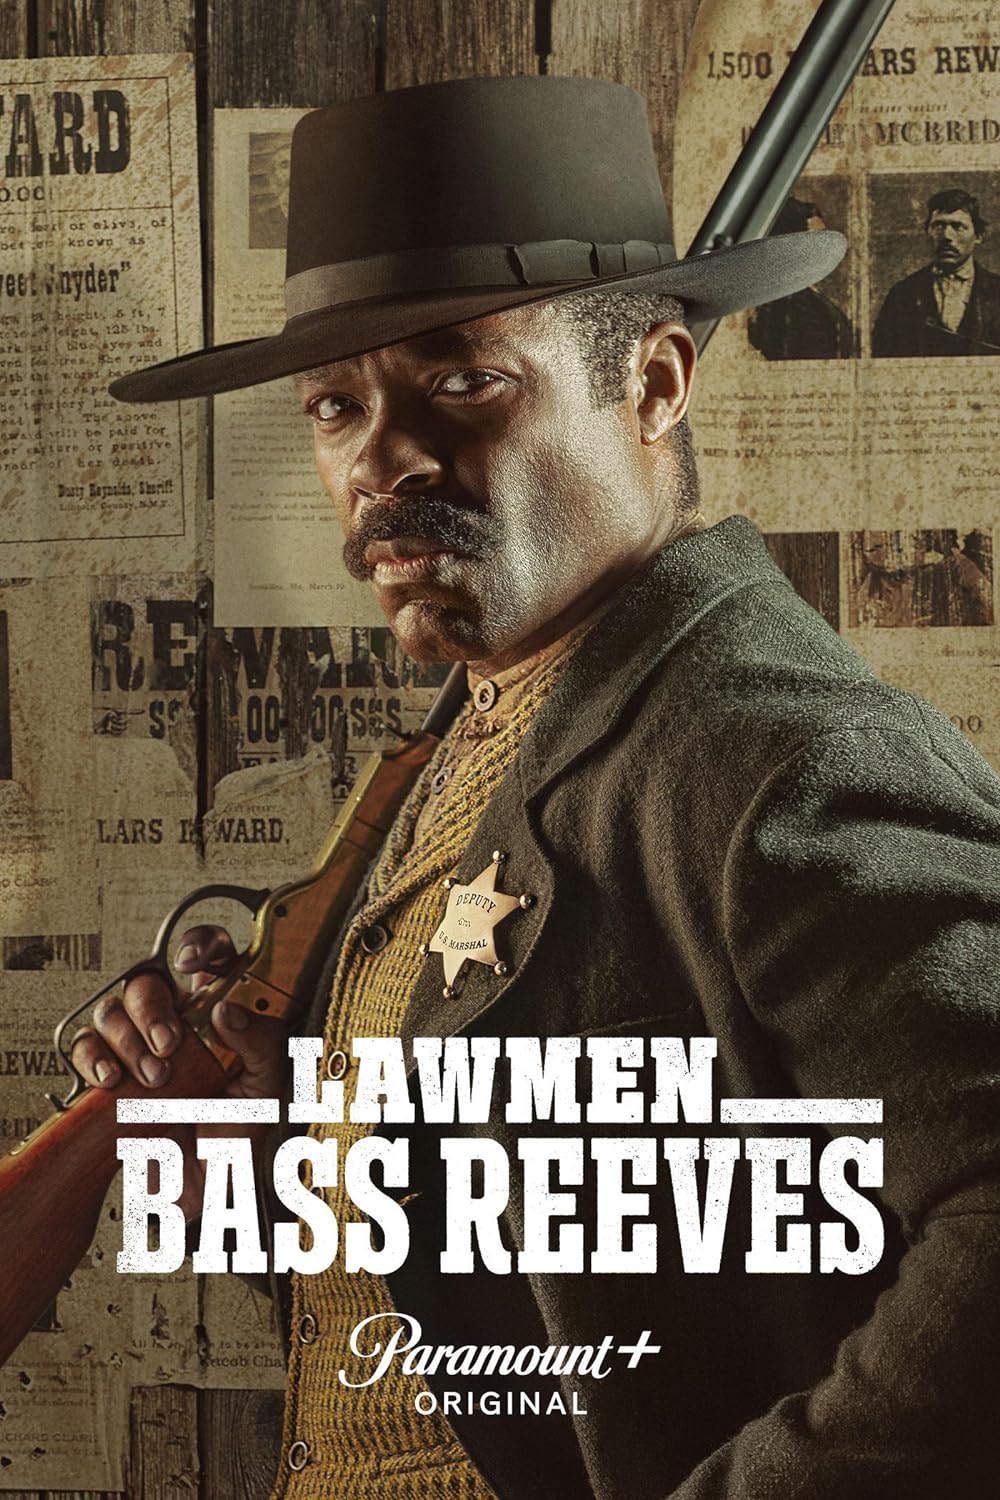 CBS to Air First Two Episodes of Paramount+ Original Series "Lawmen: Bass Reeves"